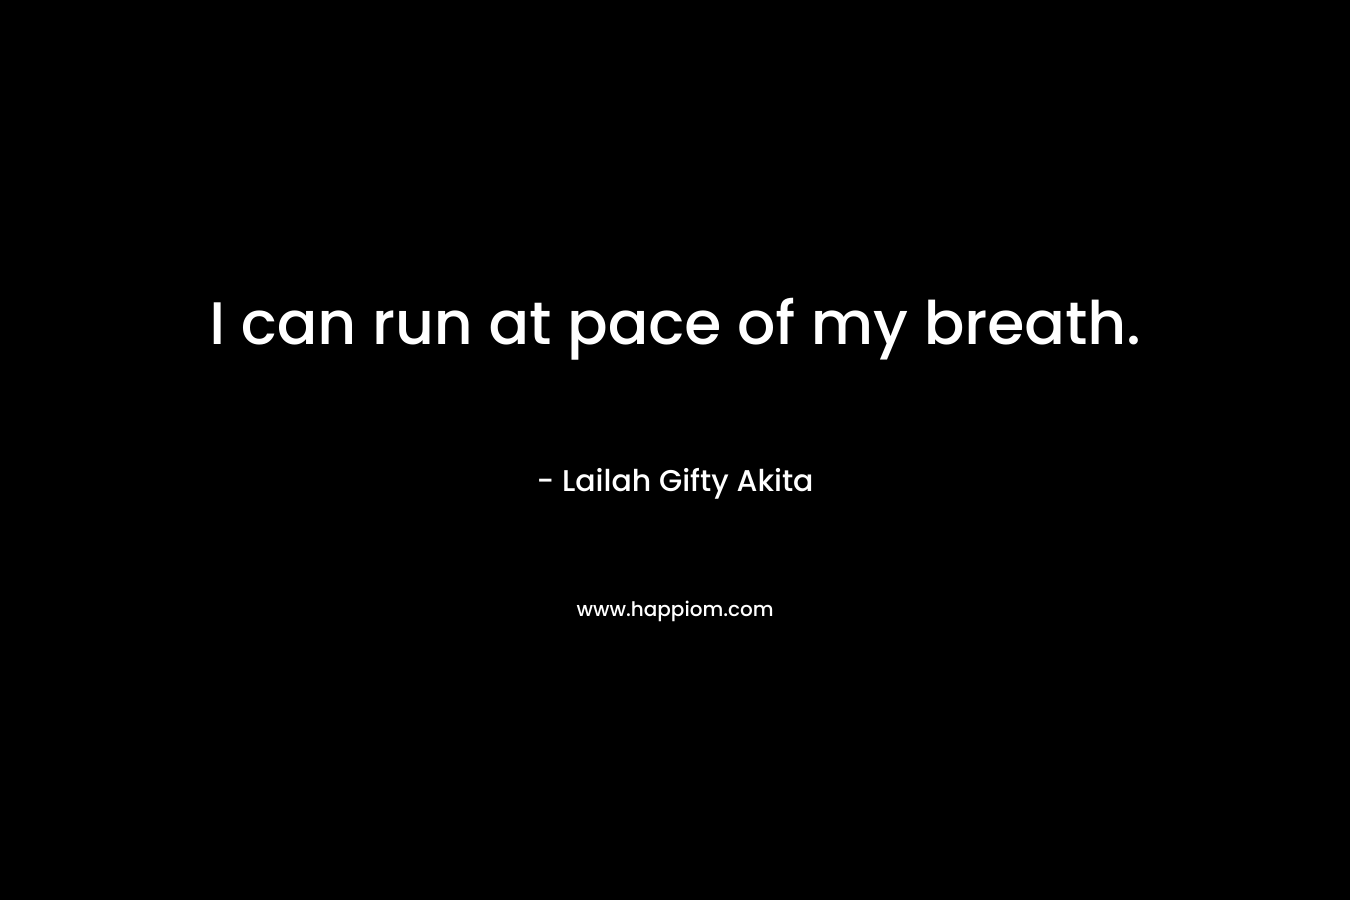 I can run at pace of my breath.